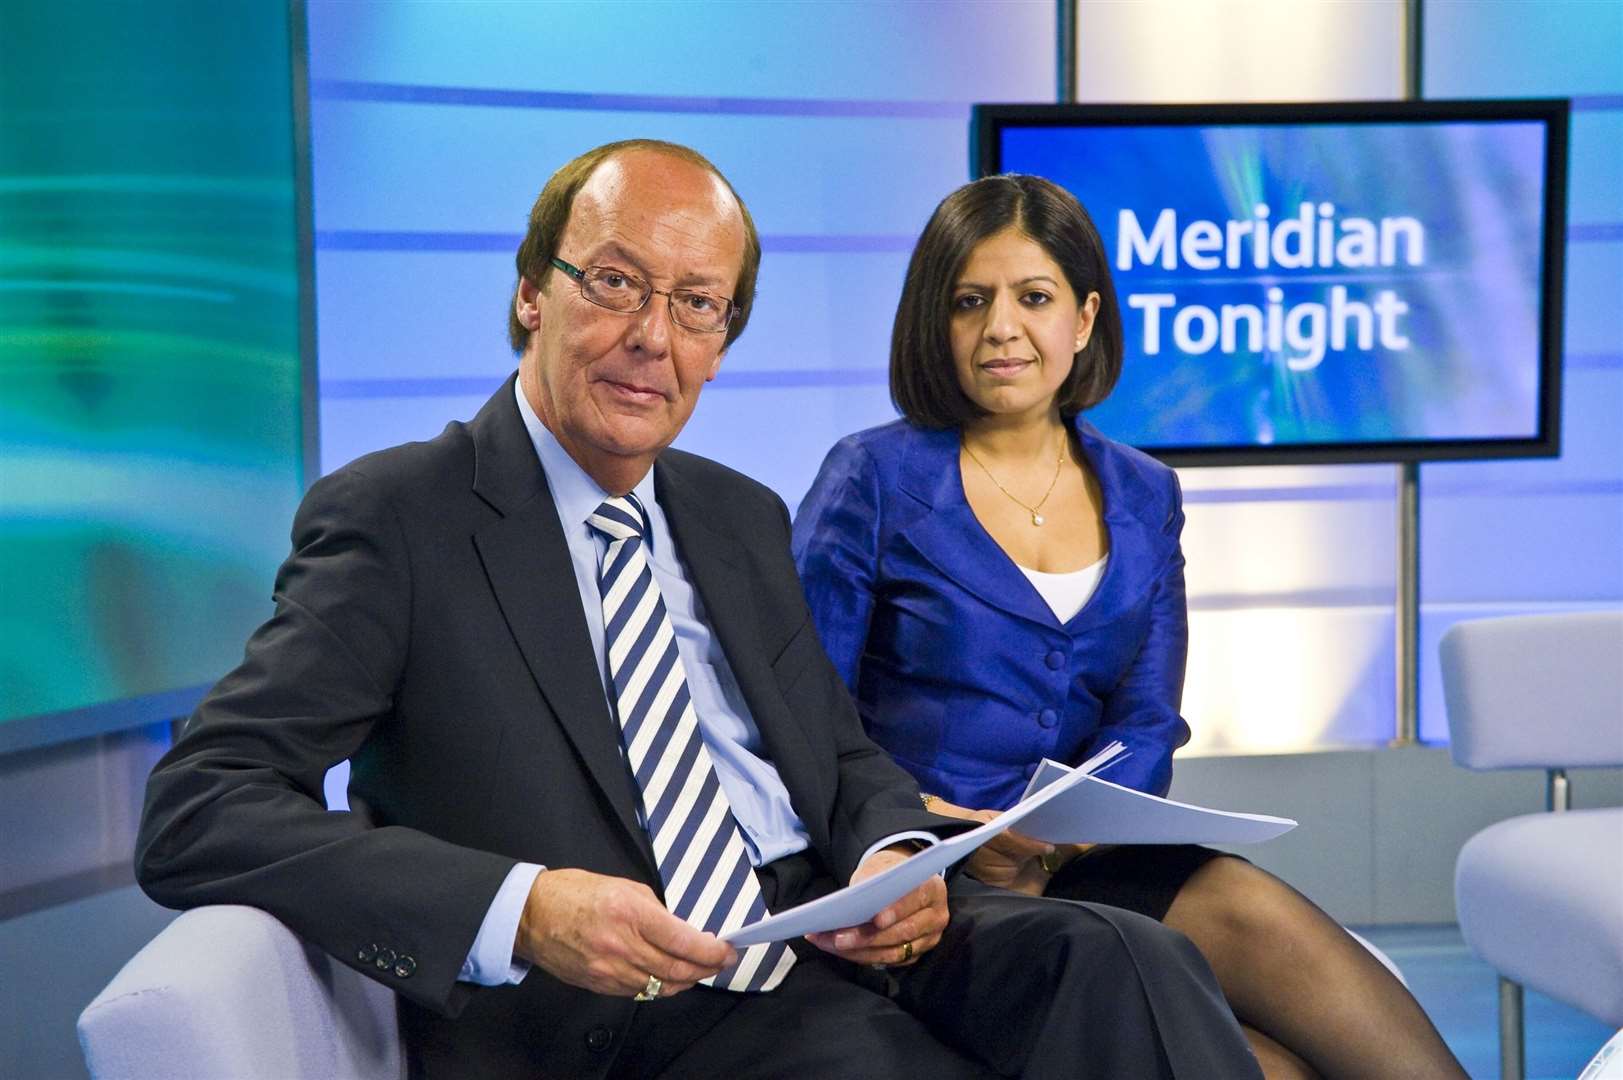 Fred Dinenage, pictured with co-host Sangeeta Bhabra, will leave ITV News Meridian at Christmas after almost four decades